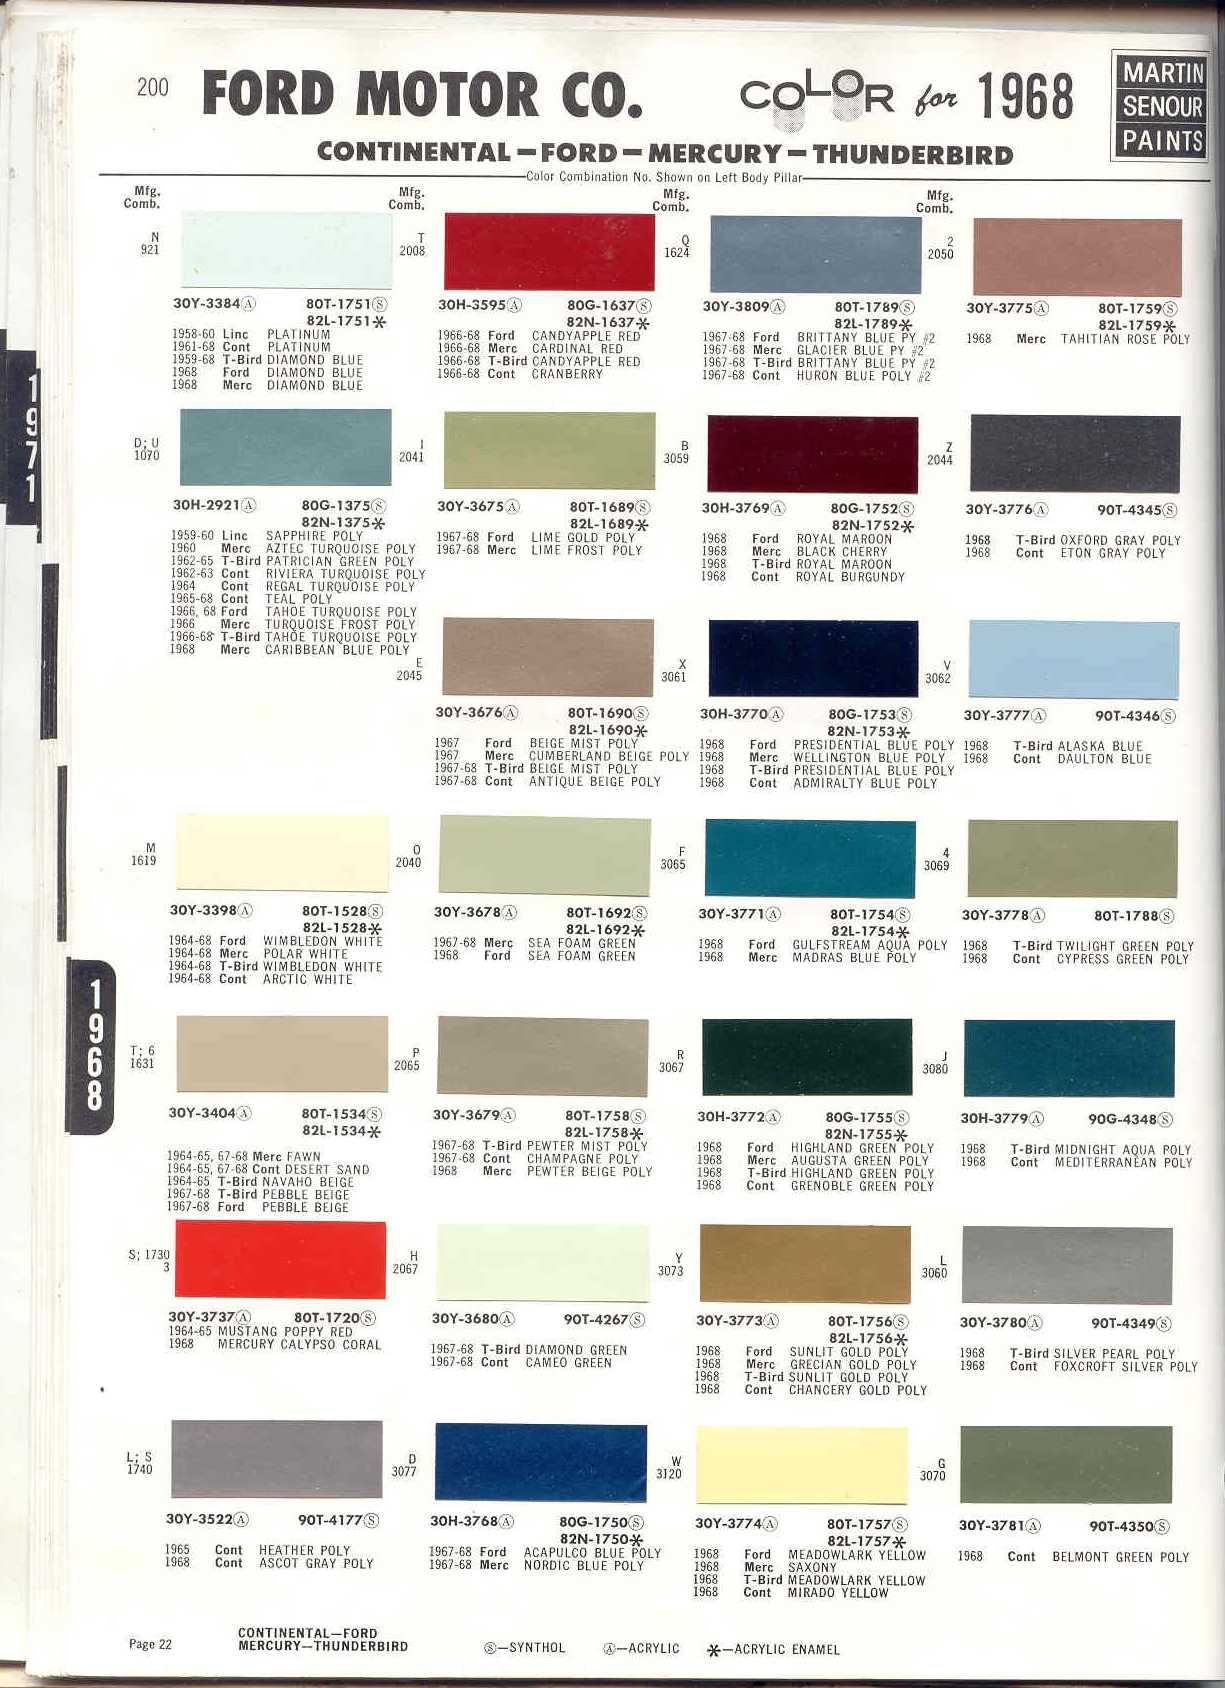 1970 Ford torino paint colors #2